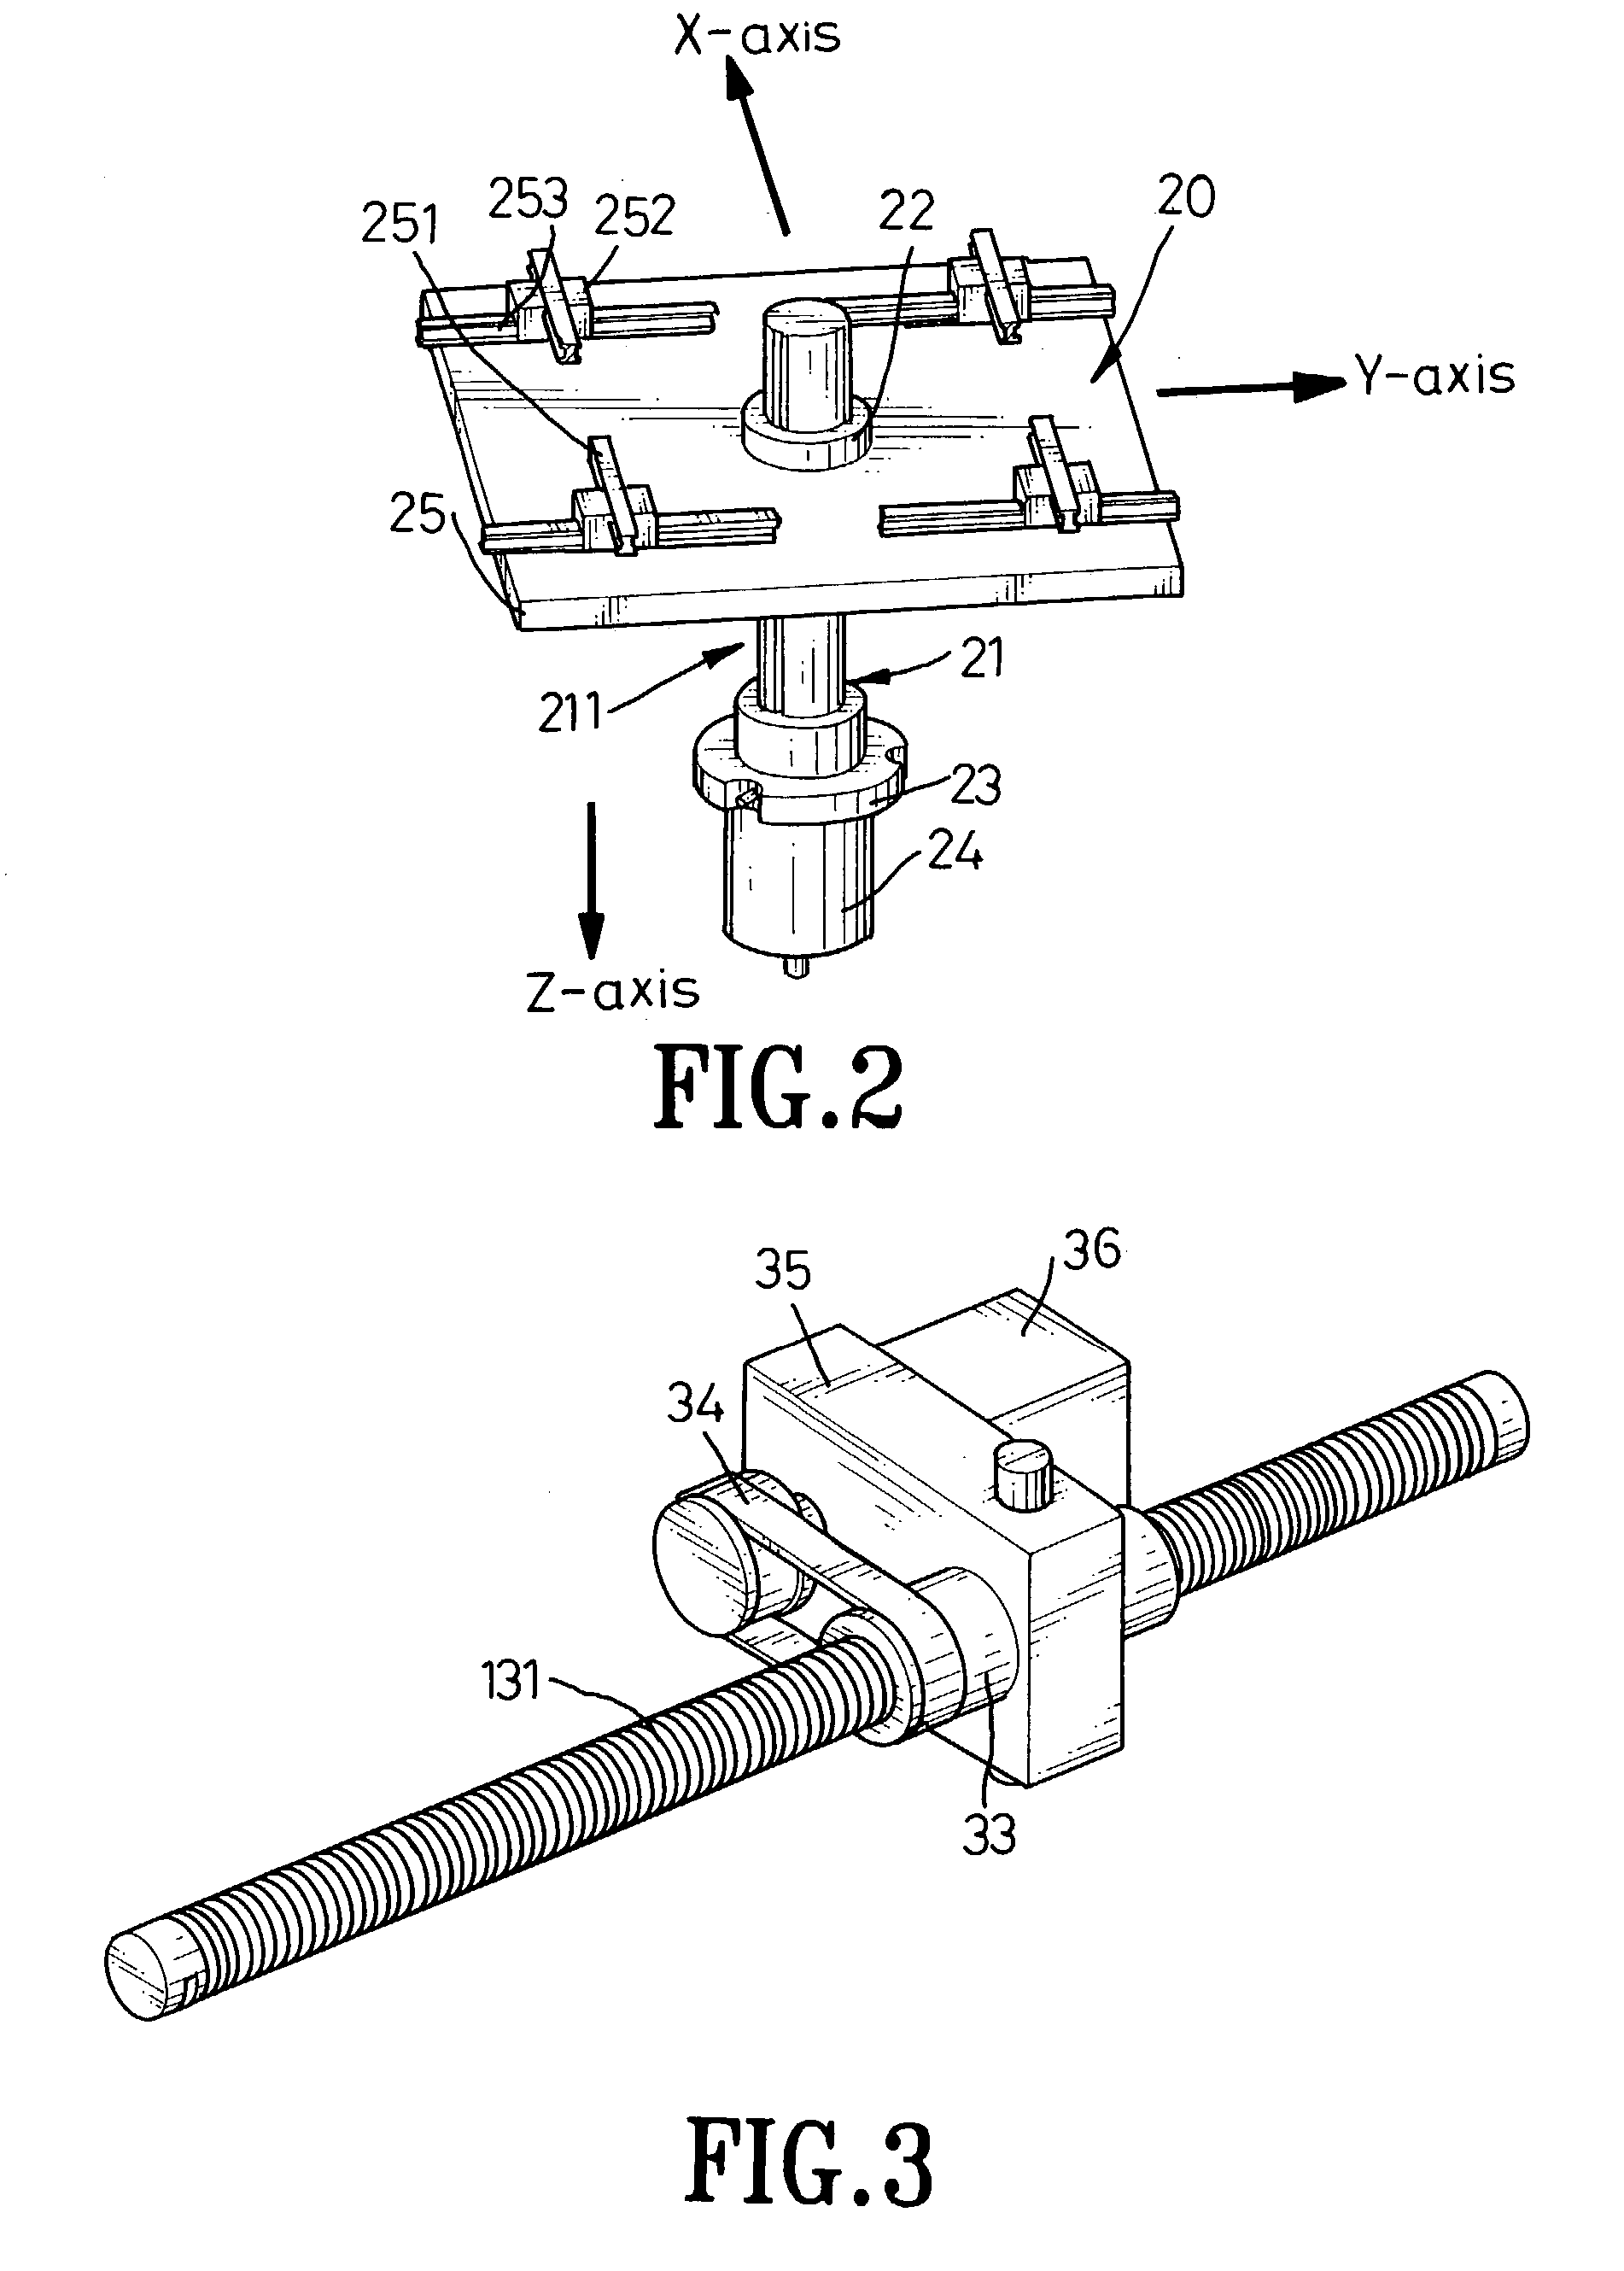 Multi-axis cartesian guided parallel kinematic machine